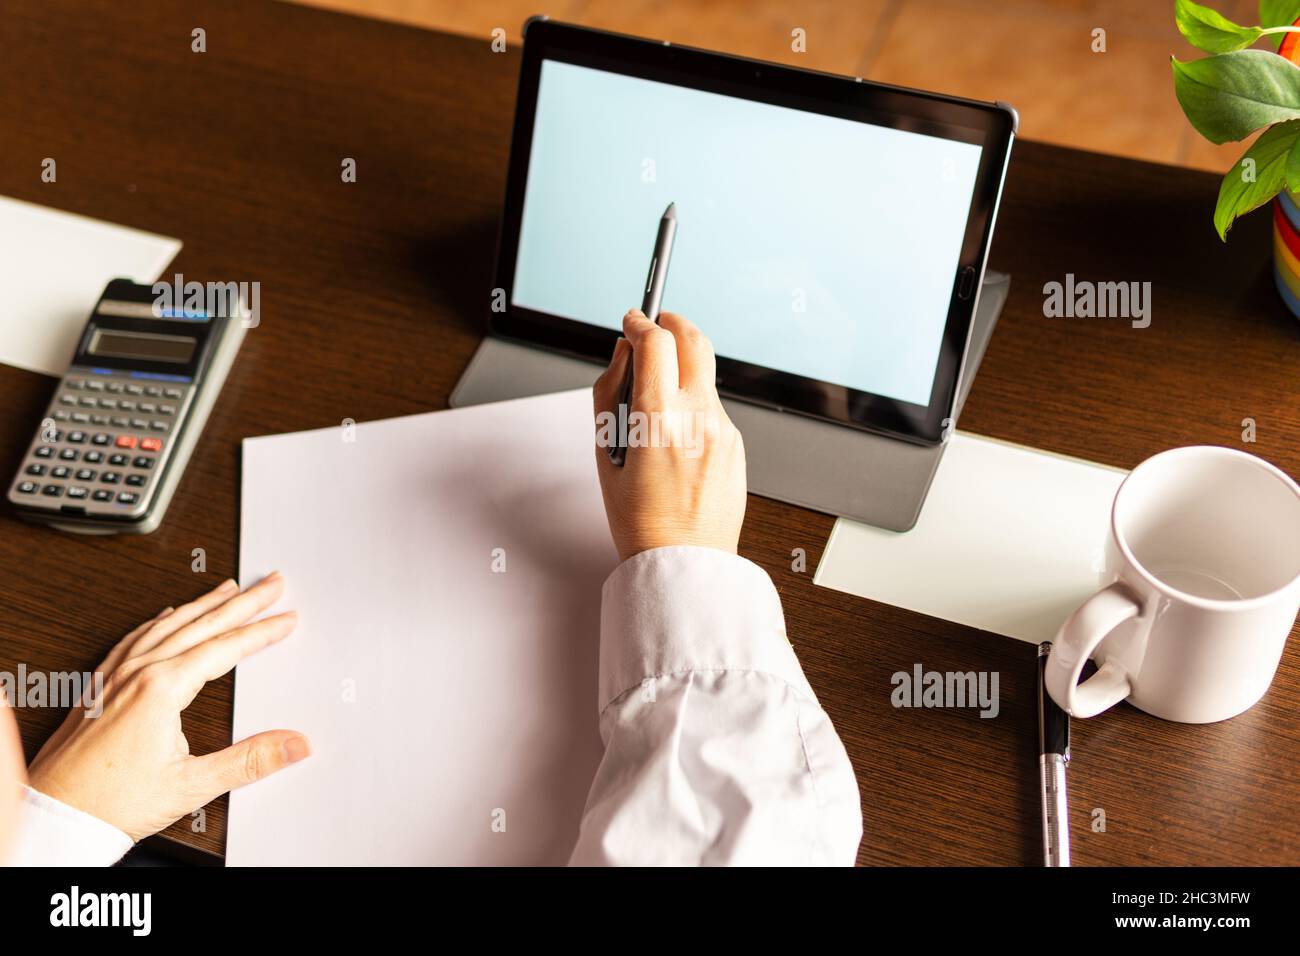 Woman using digital tablet with digital pencil, businesswoman or student. Working from home concept Stock Photo